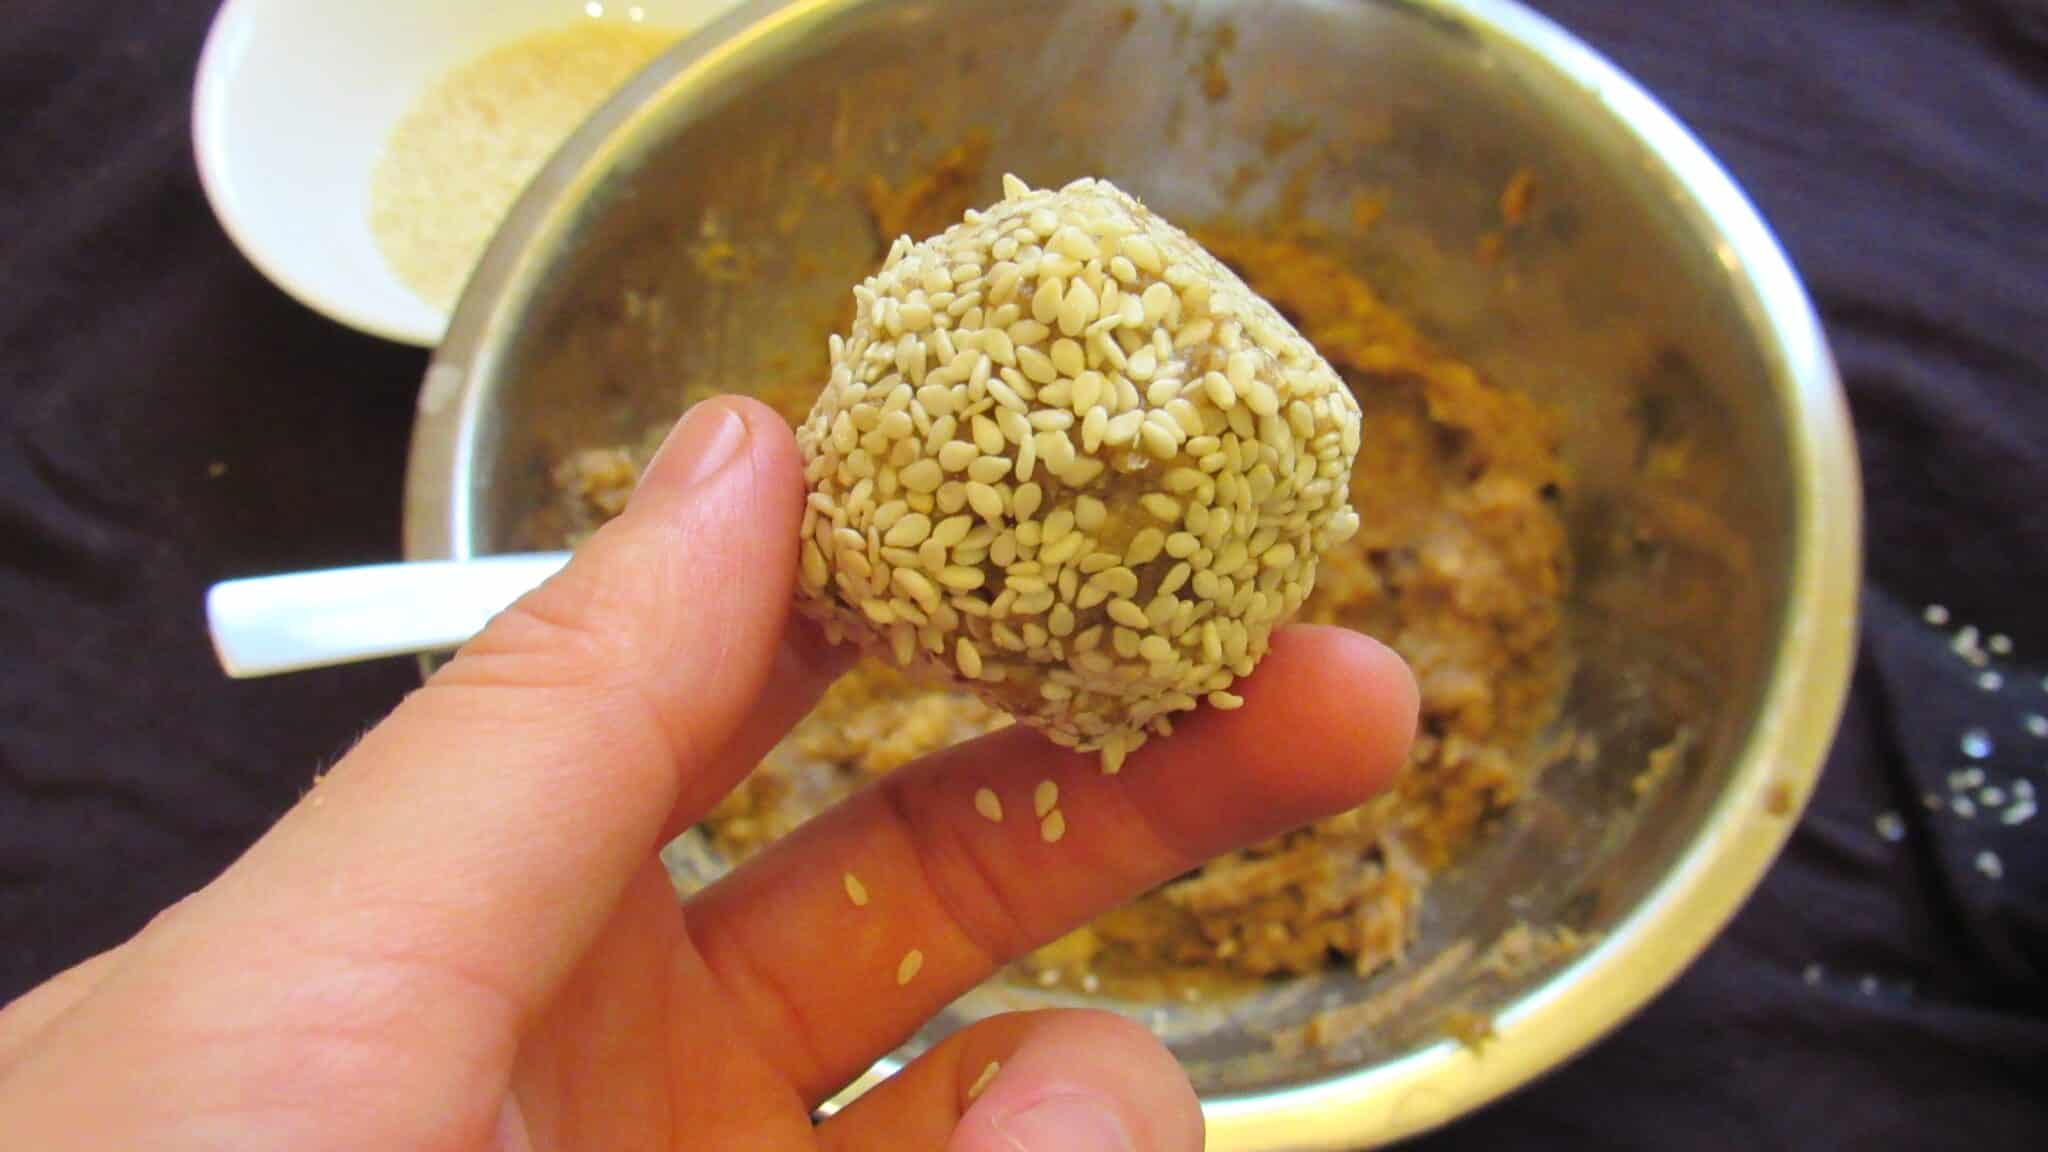 The process of making walnut date balls, a hand holding one is showing how to make it.